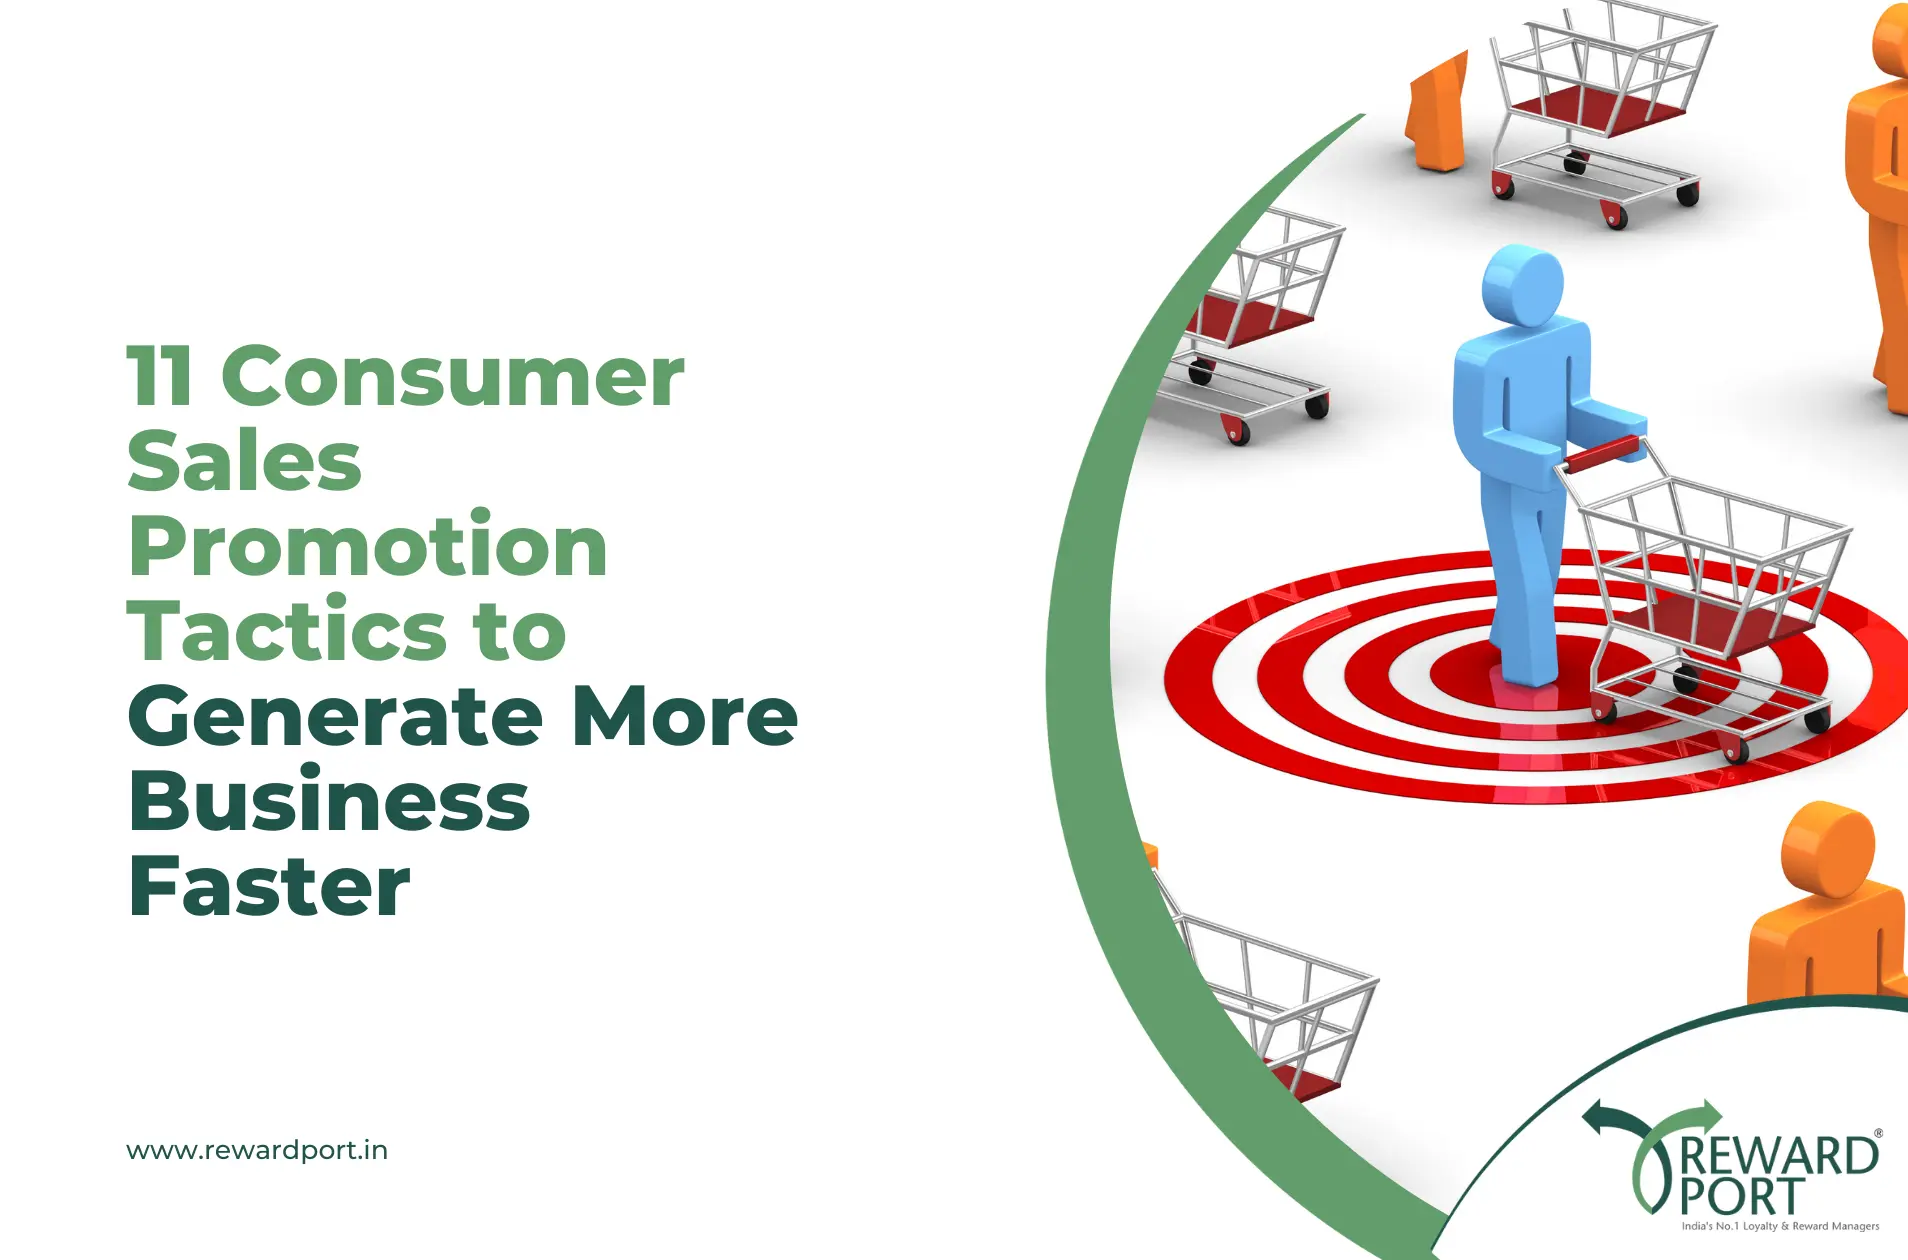 11 Consumer Sales Promotion Tactics to Generate More Business Faster